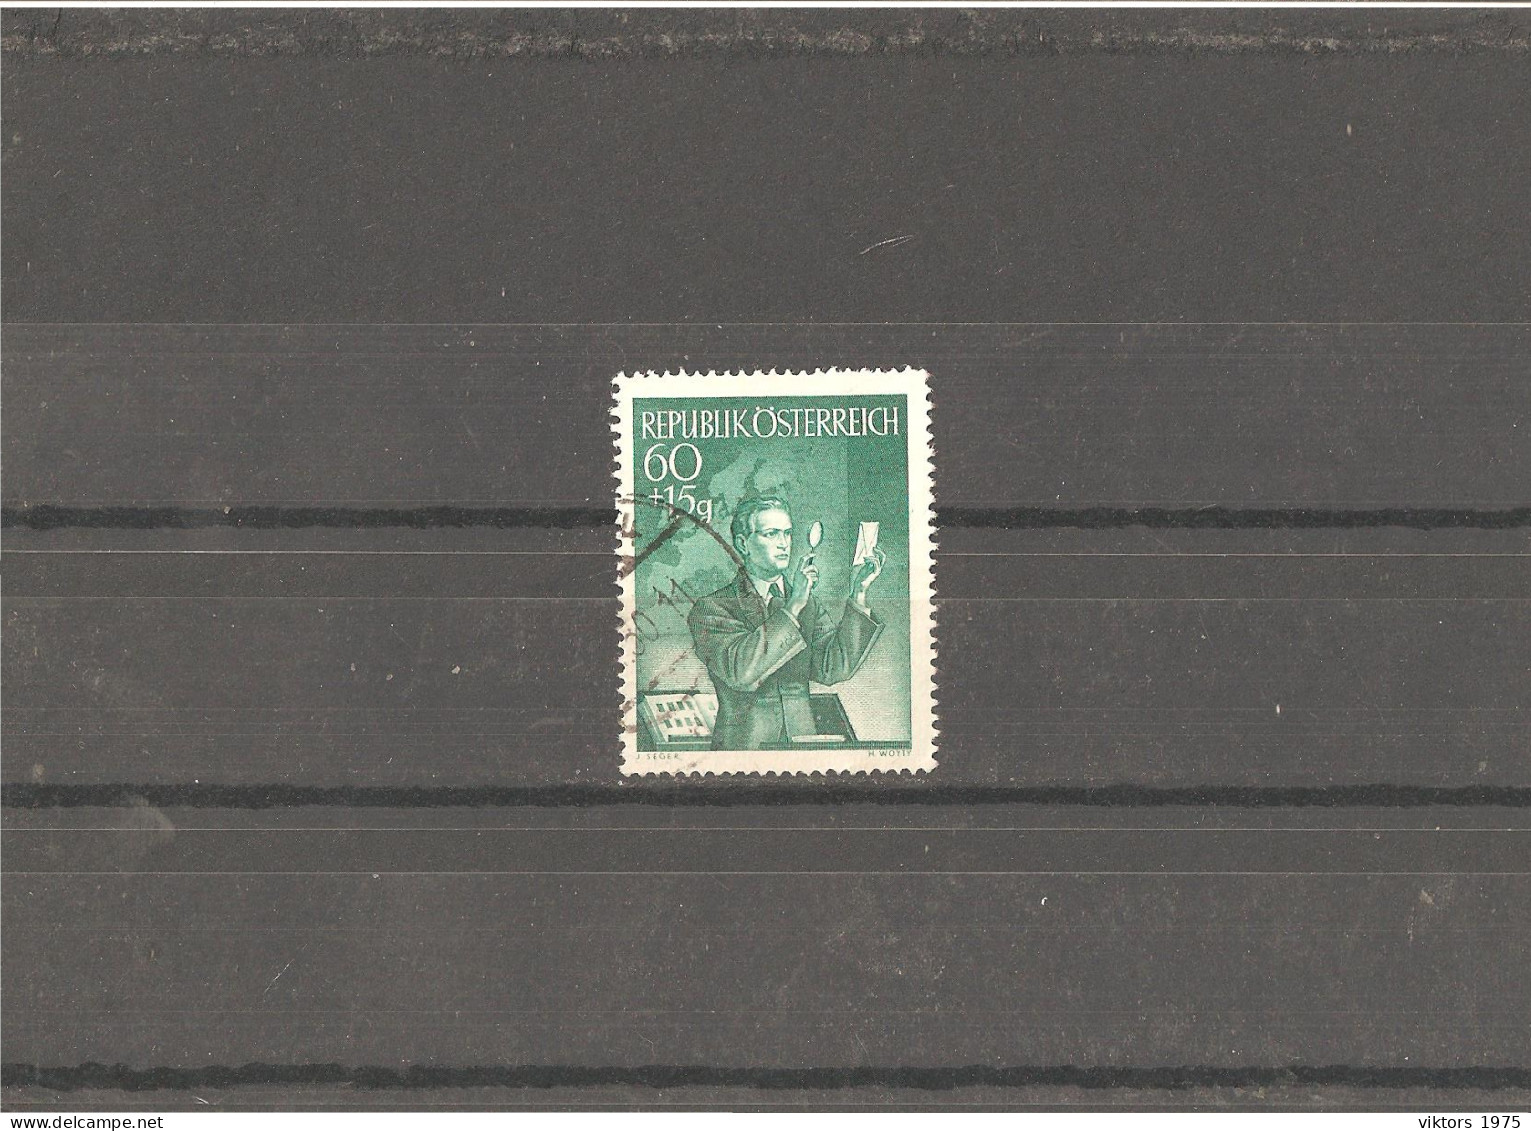 Used Stamp Nr.957 In MICHEL Catalog - Used Stamps